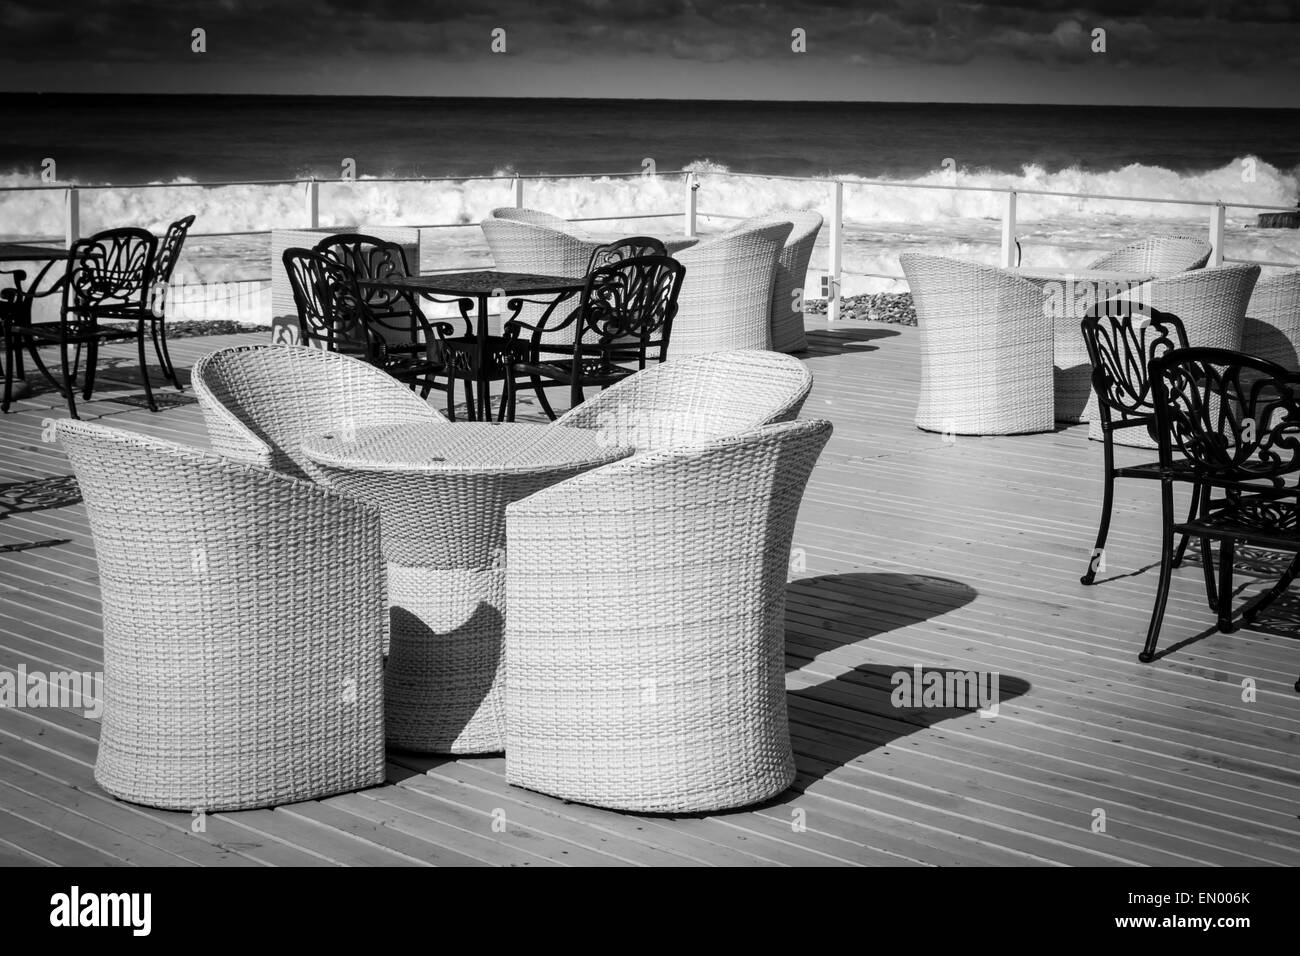 Empty wicker and black iron chairs wait for tourists in the cloudy sun cast sky Stock Photo